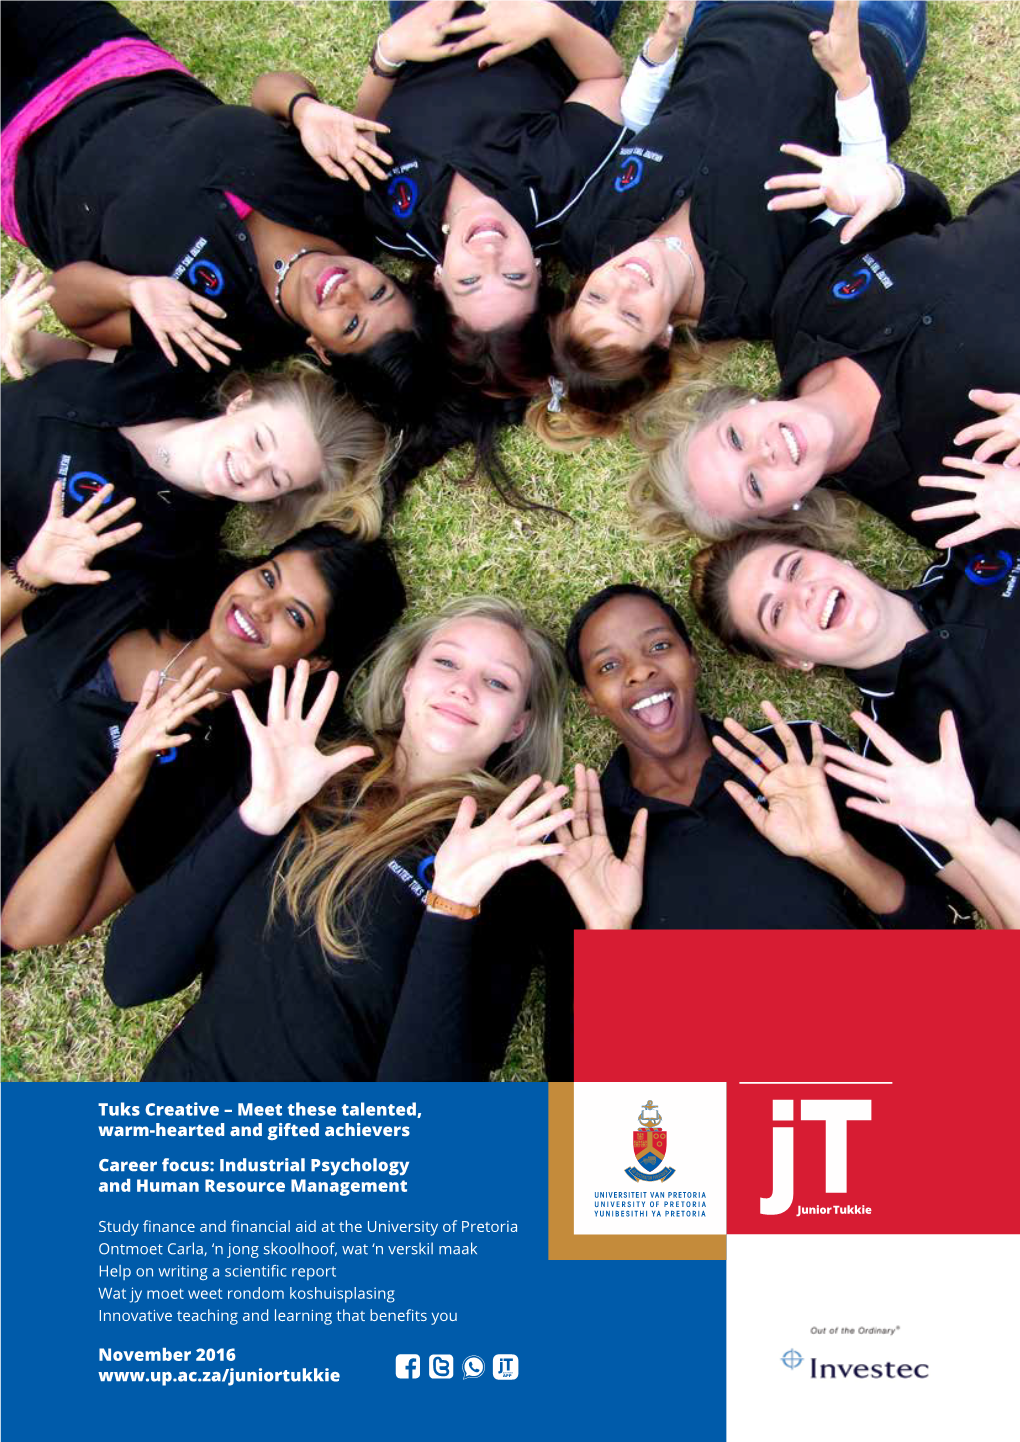 Tuks Creative – Meet These Talented, Warm-Hearted and Gifted Achievers